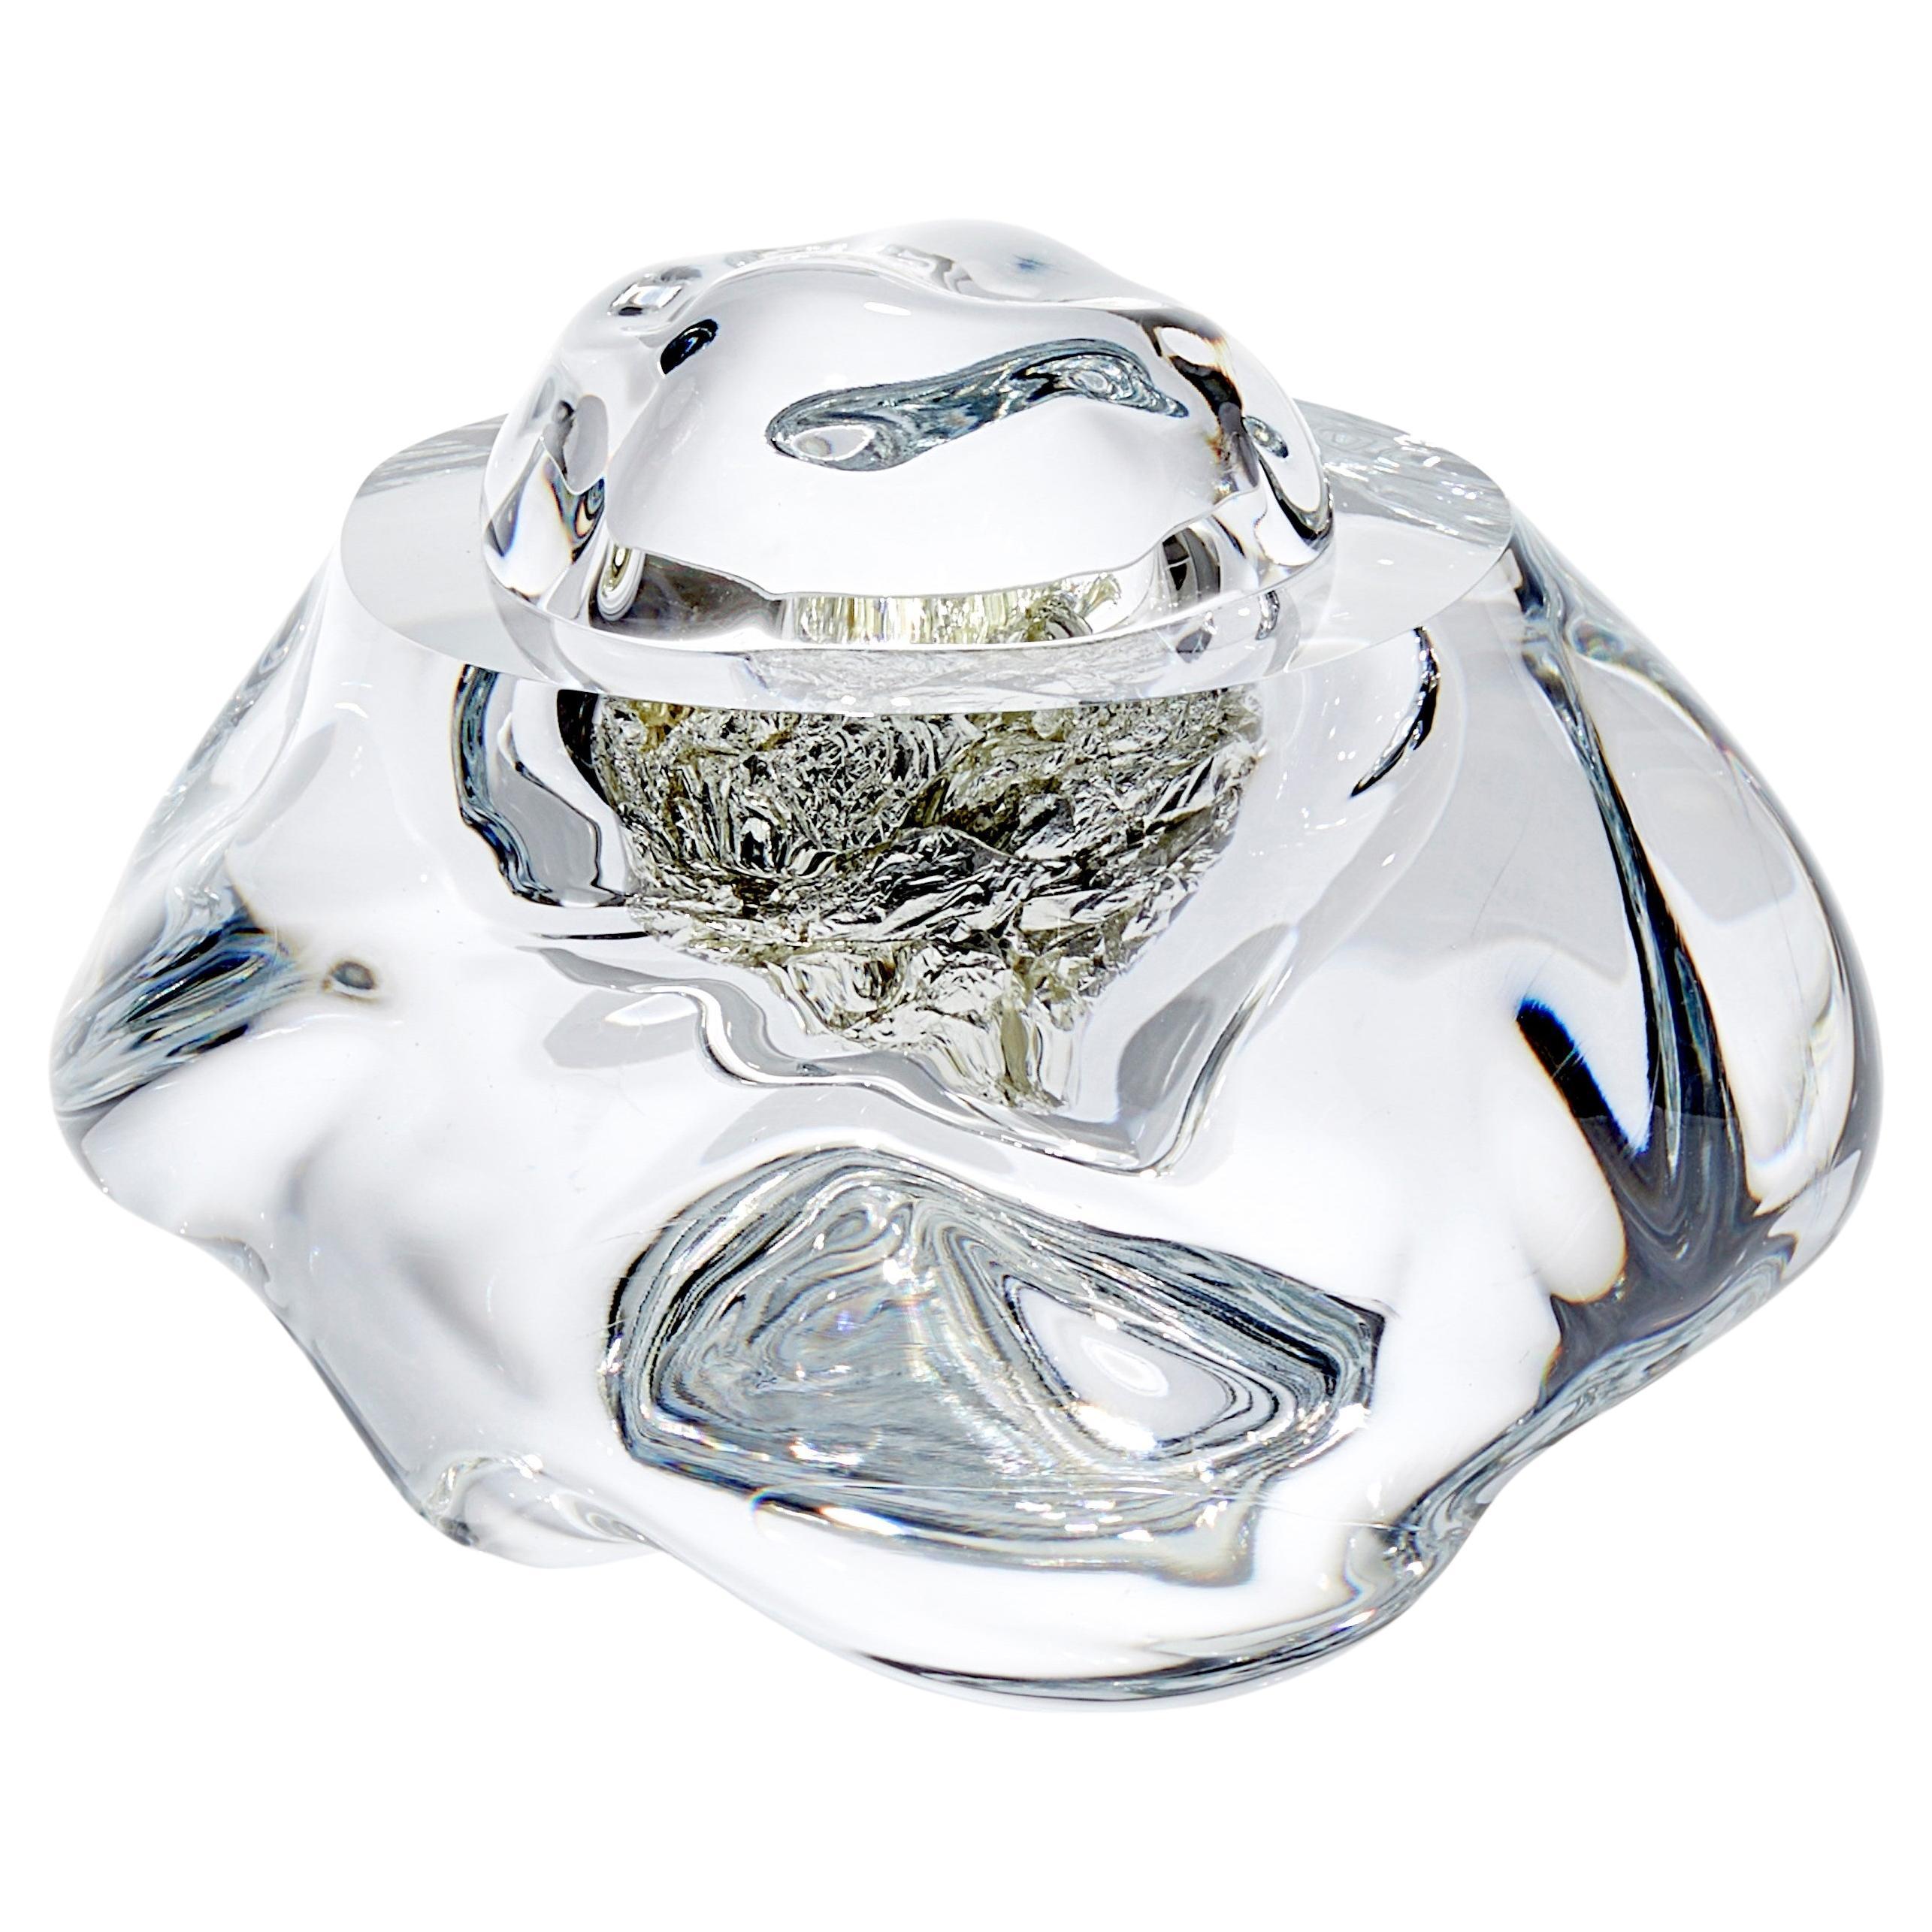 Erratic K with 12ct White Gold, optical glass sculpture by Anthony Scala